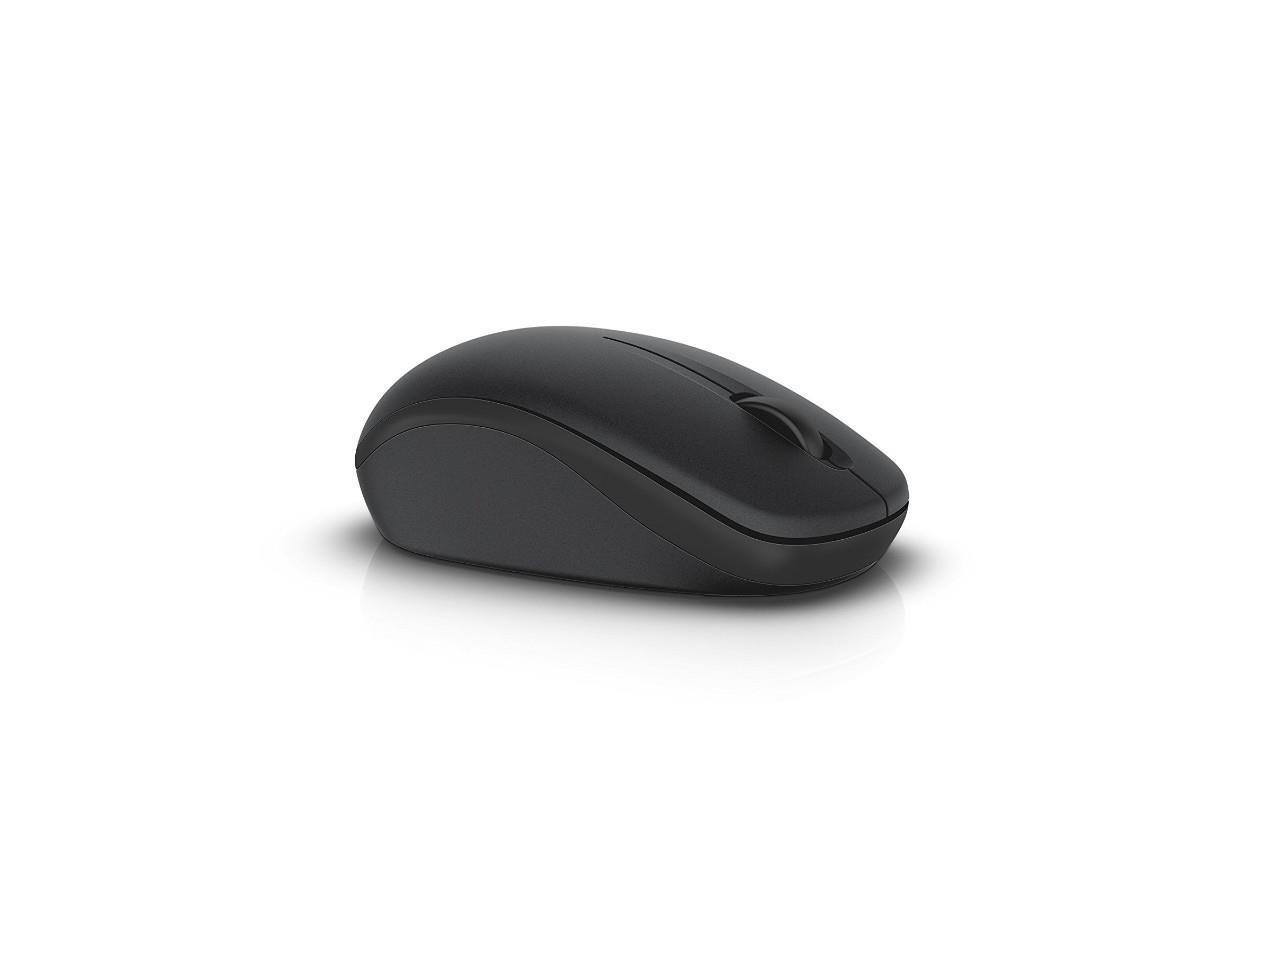 DELL WM126 NNP0G Black 3 Buttons 1 x Wheel USB RF Wireless Optical 1000 dpi Wireless Mouse - image 5 of 16